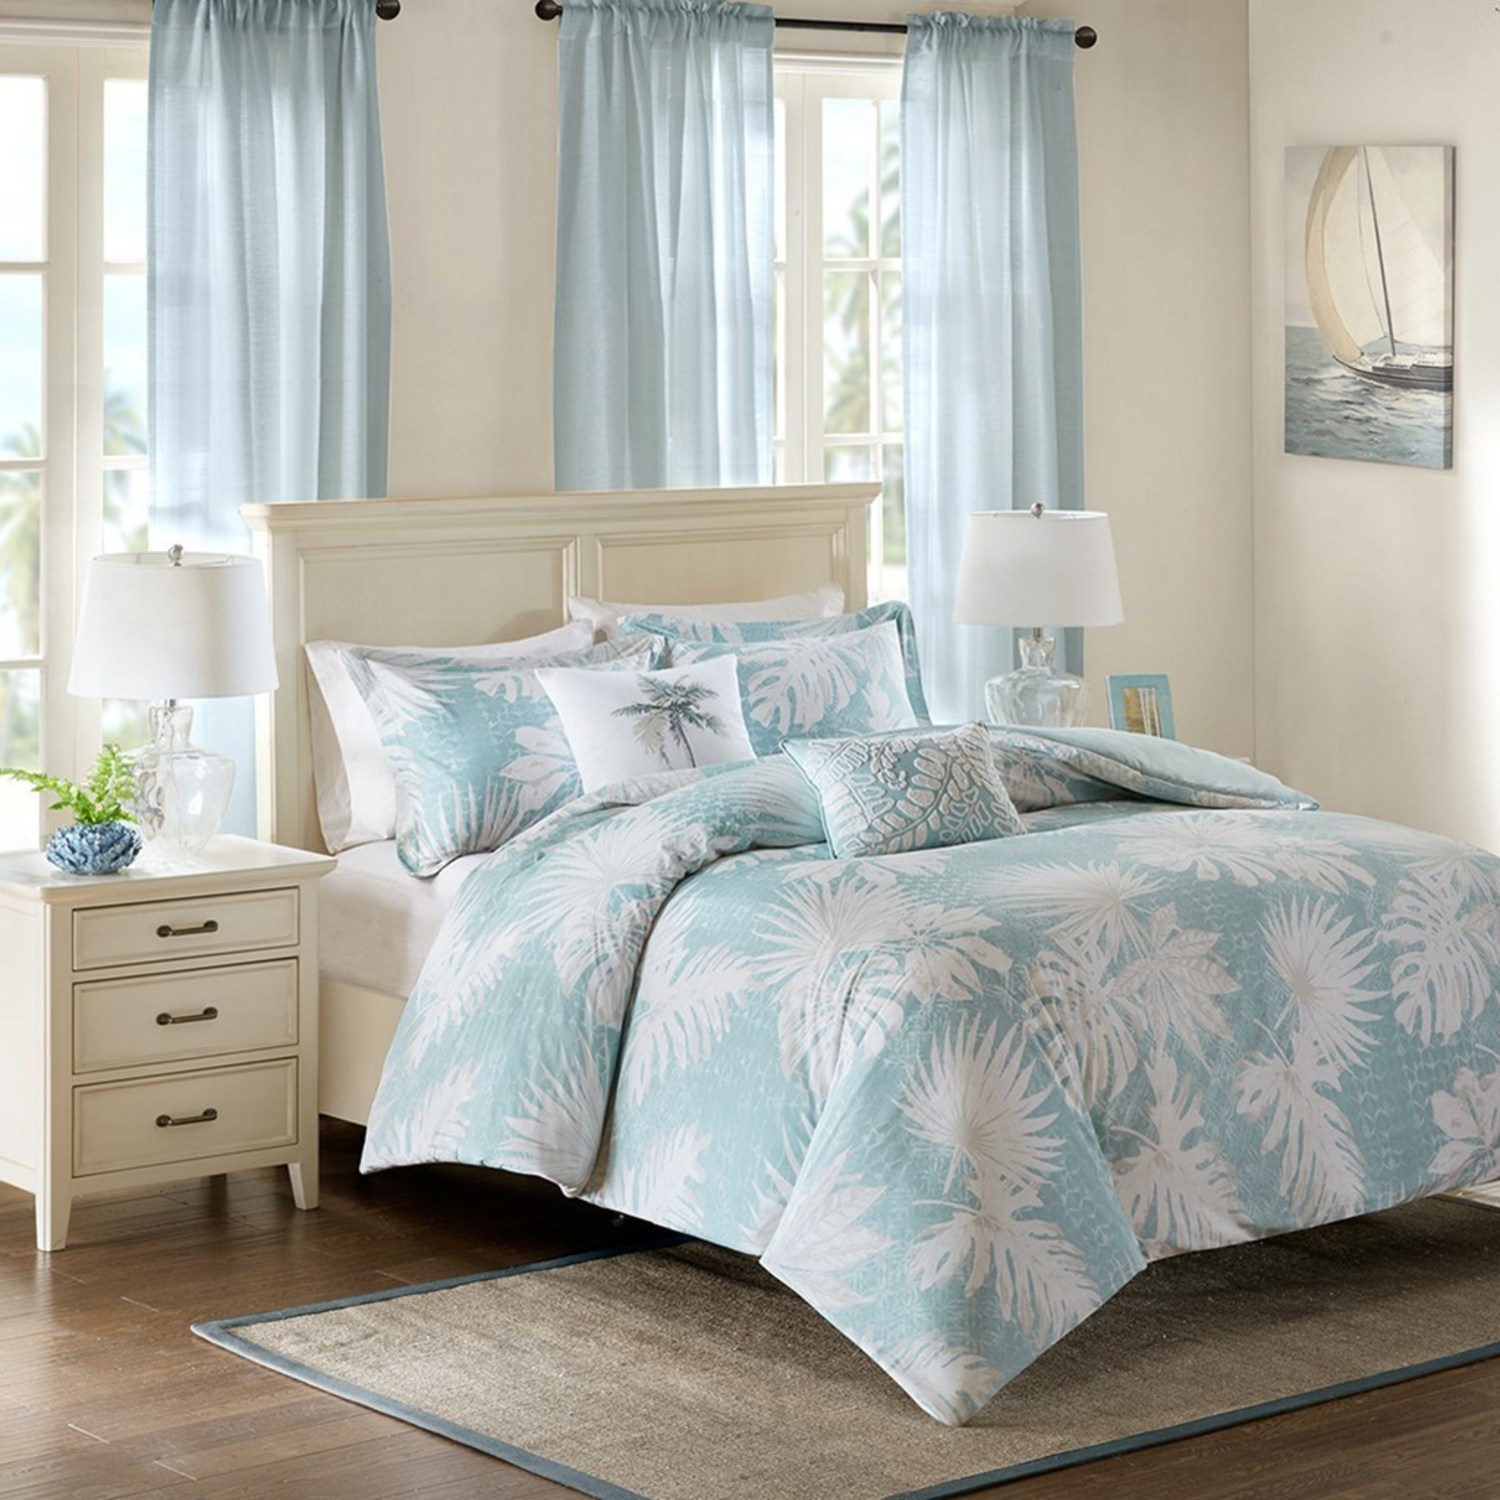 Palm Grove By Harbor House, Harbour House Duvet Covers